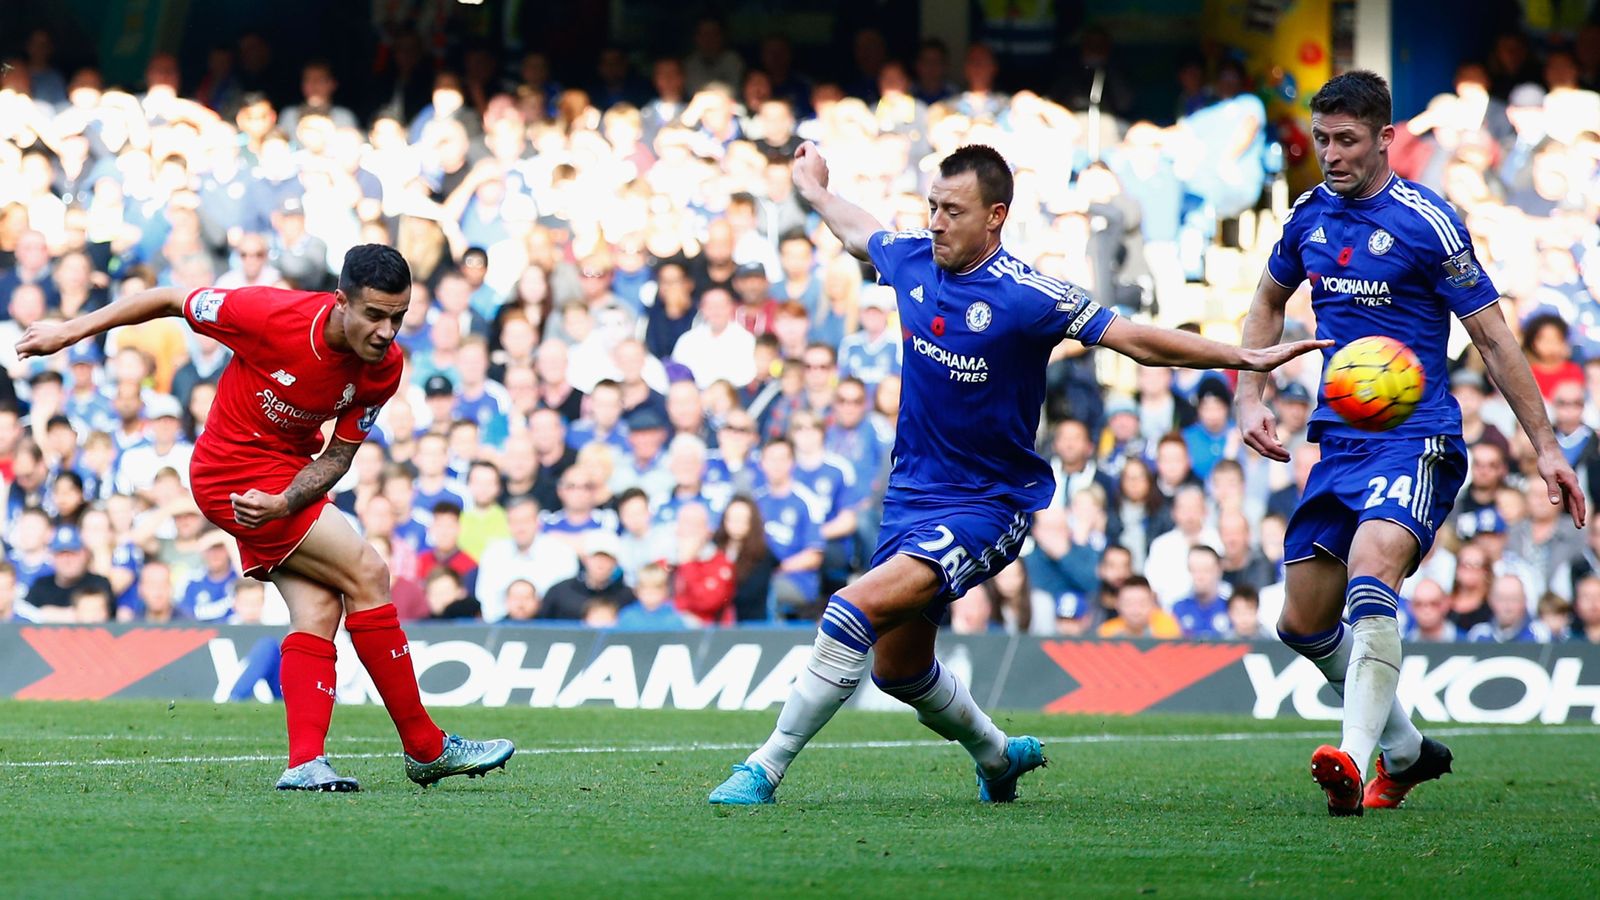 Chelsea 1 - 3 Liverpool - Match Report & Highlights